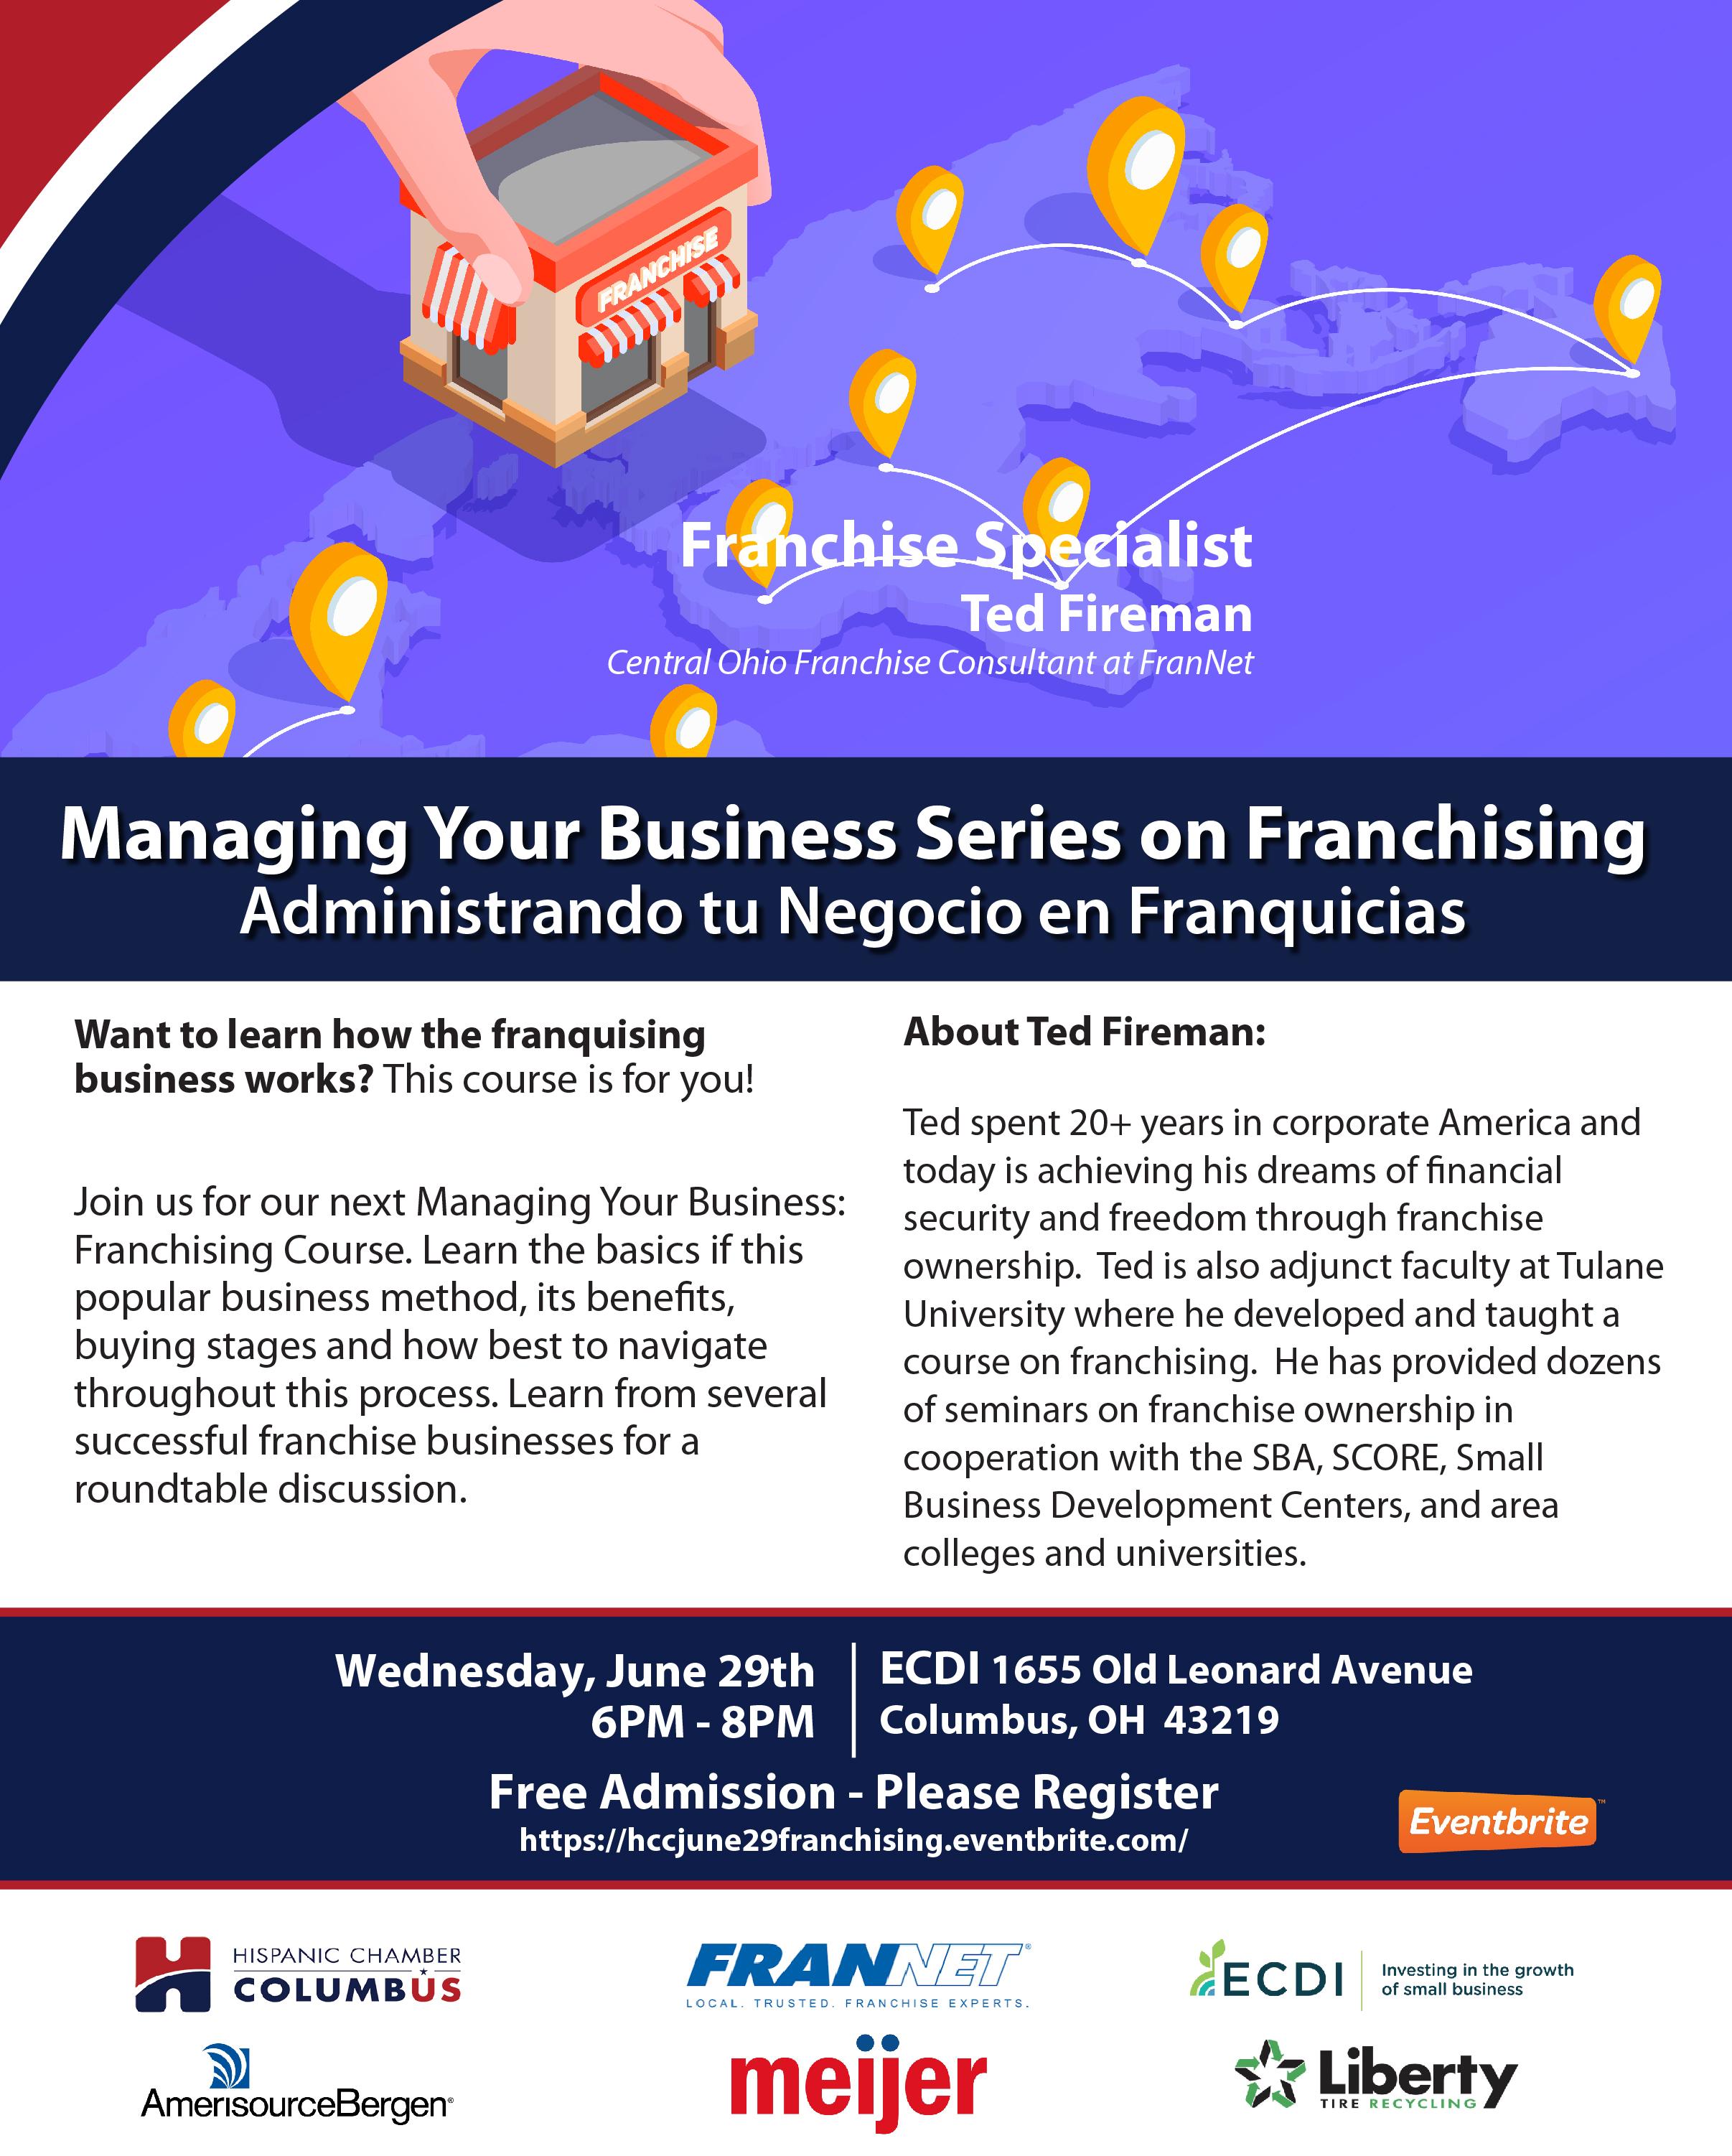 Managing Your Business Series: Franchising